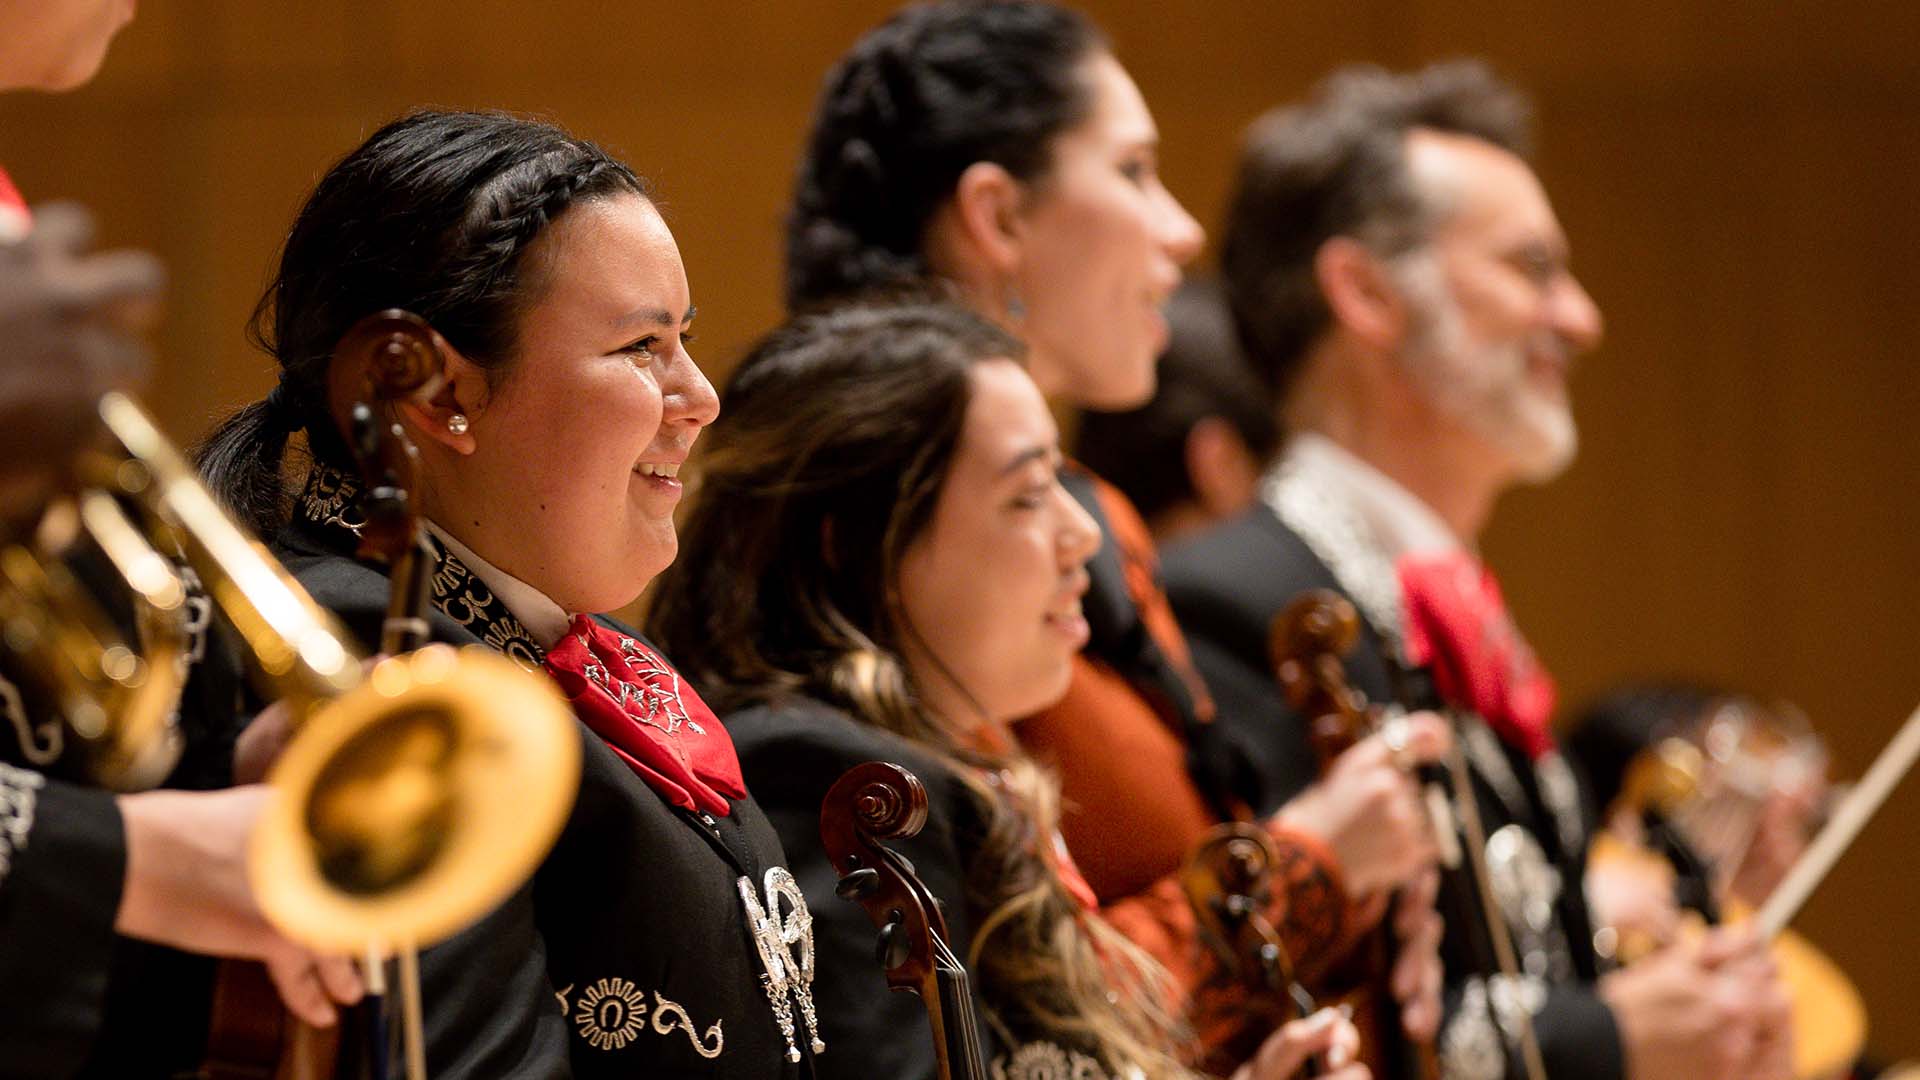 The MSU Denver mariachi group perform on stage during the Viva Southwest Mariachi Festival in the King Center